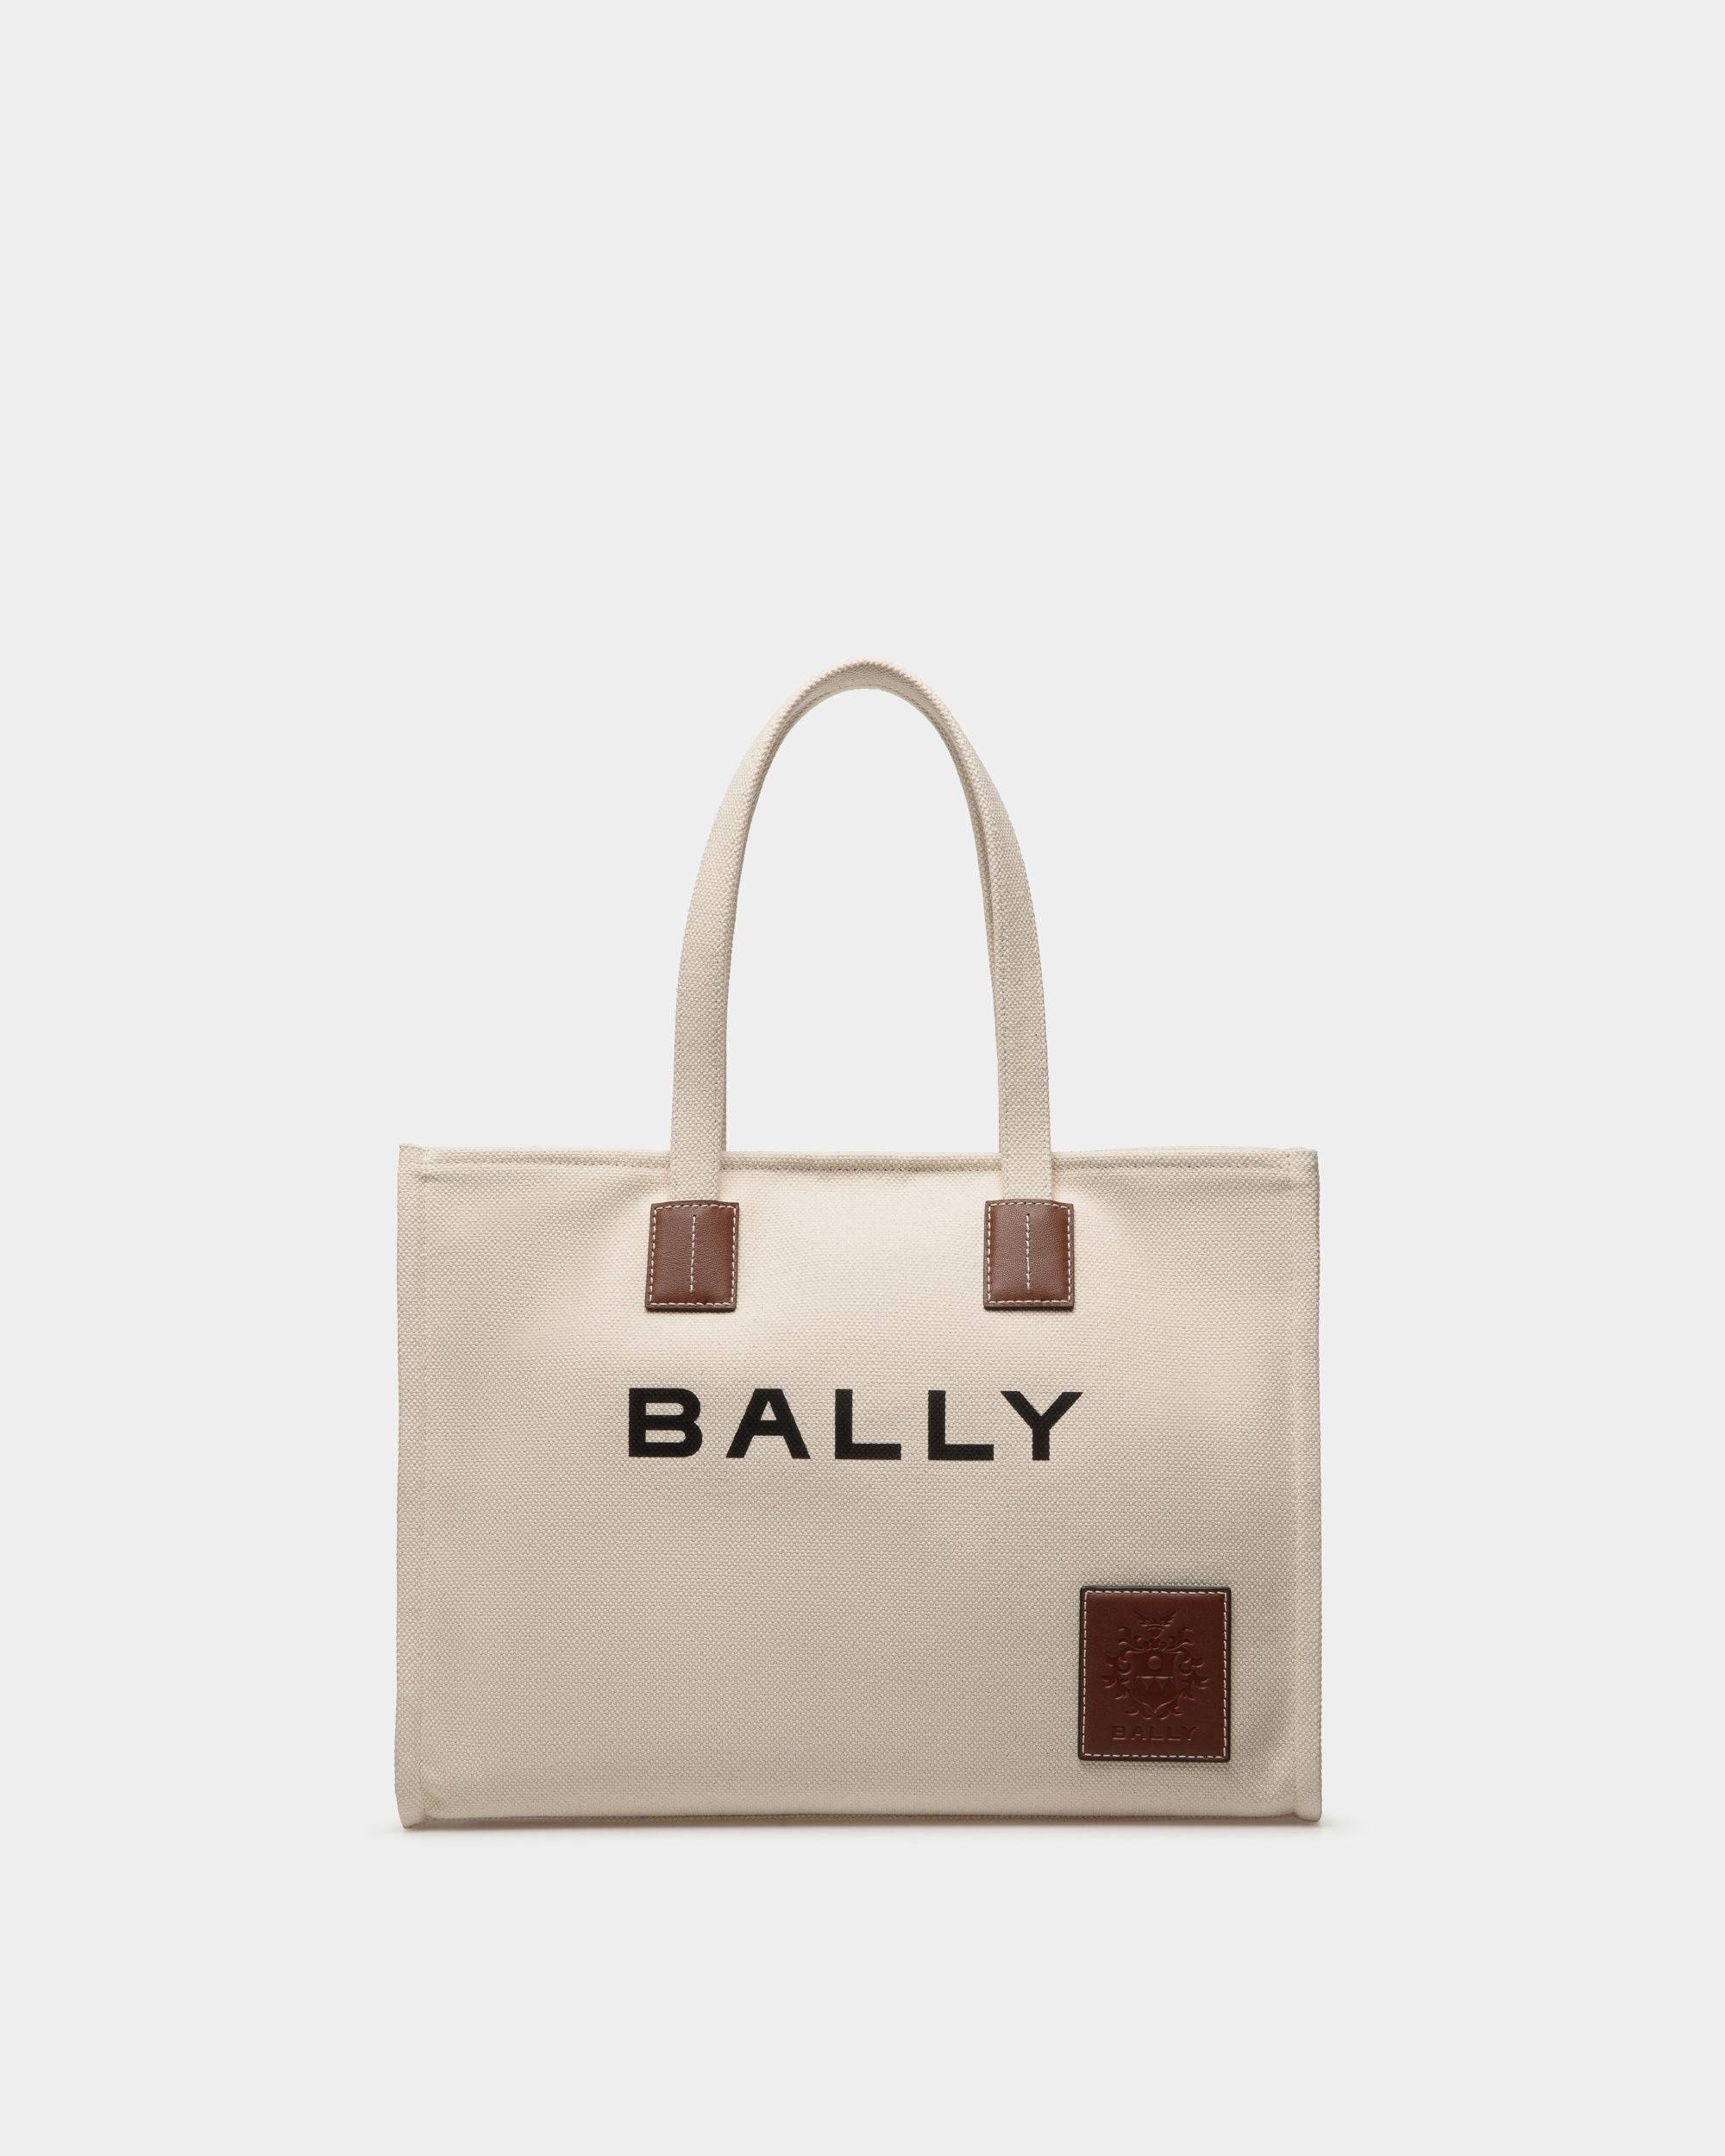 Women's Akelei Tote Bag in Canvas | Bally | Still Life Front